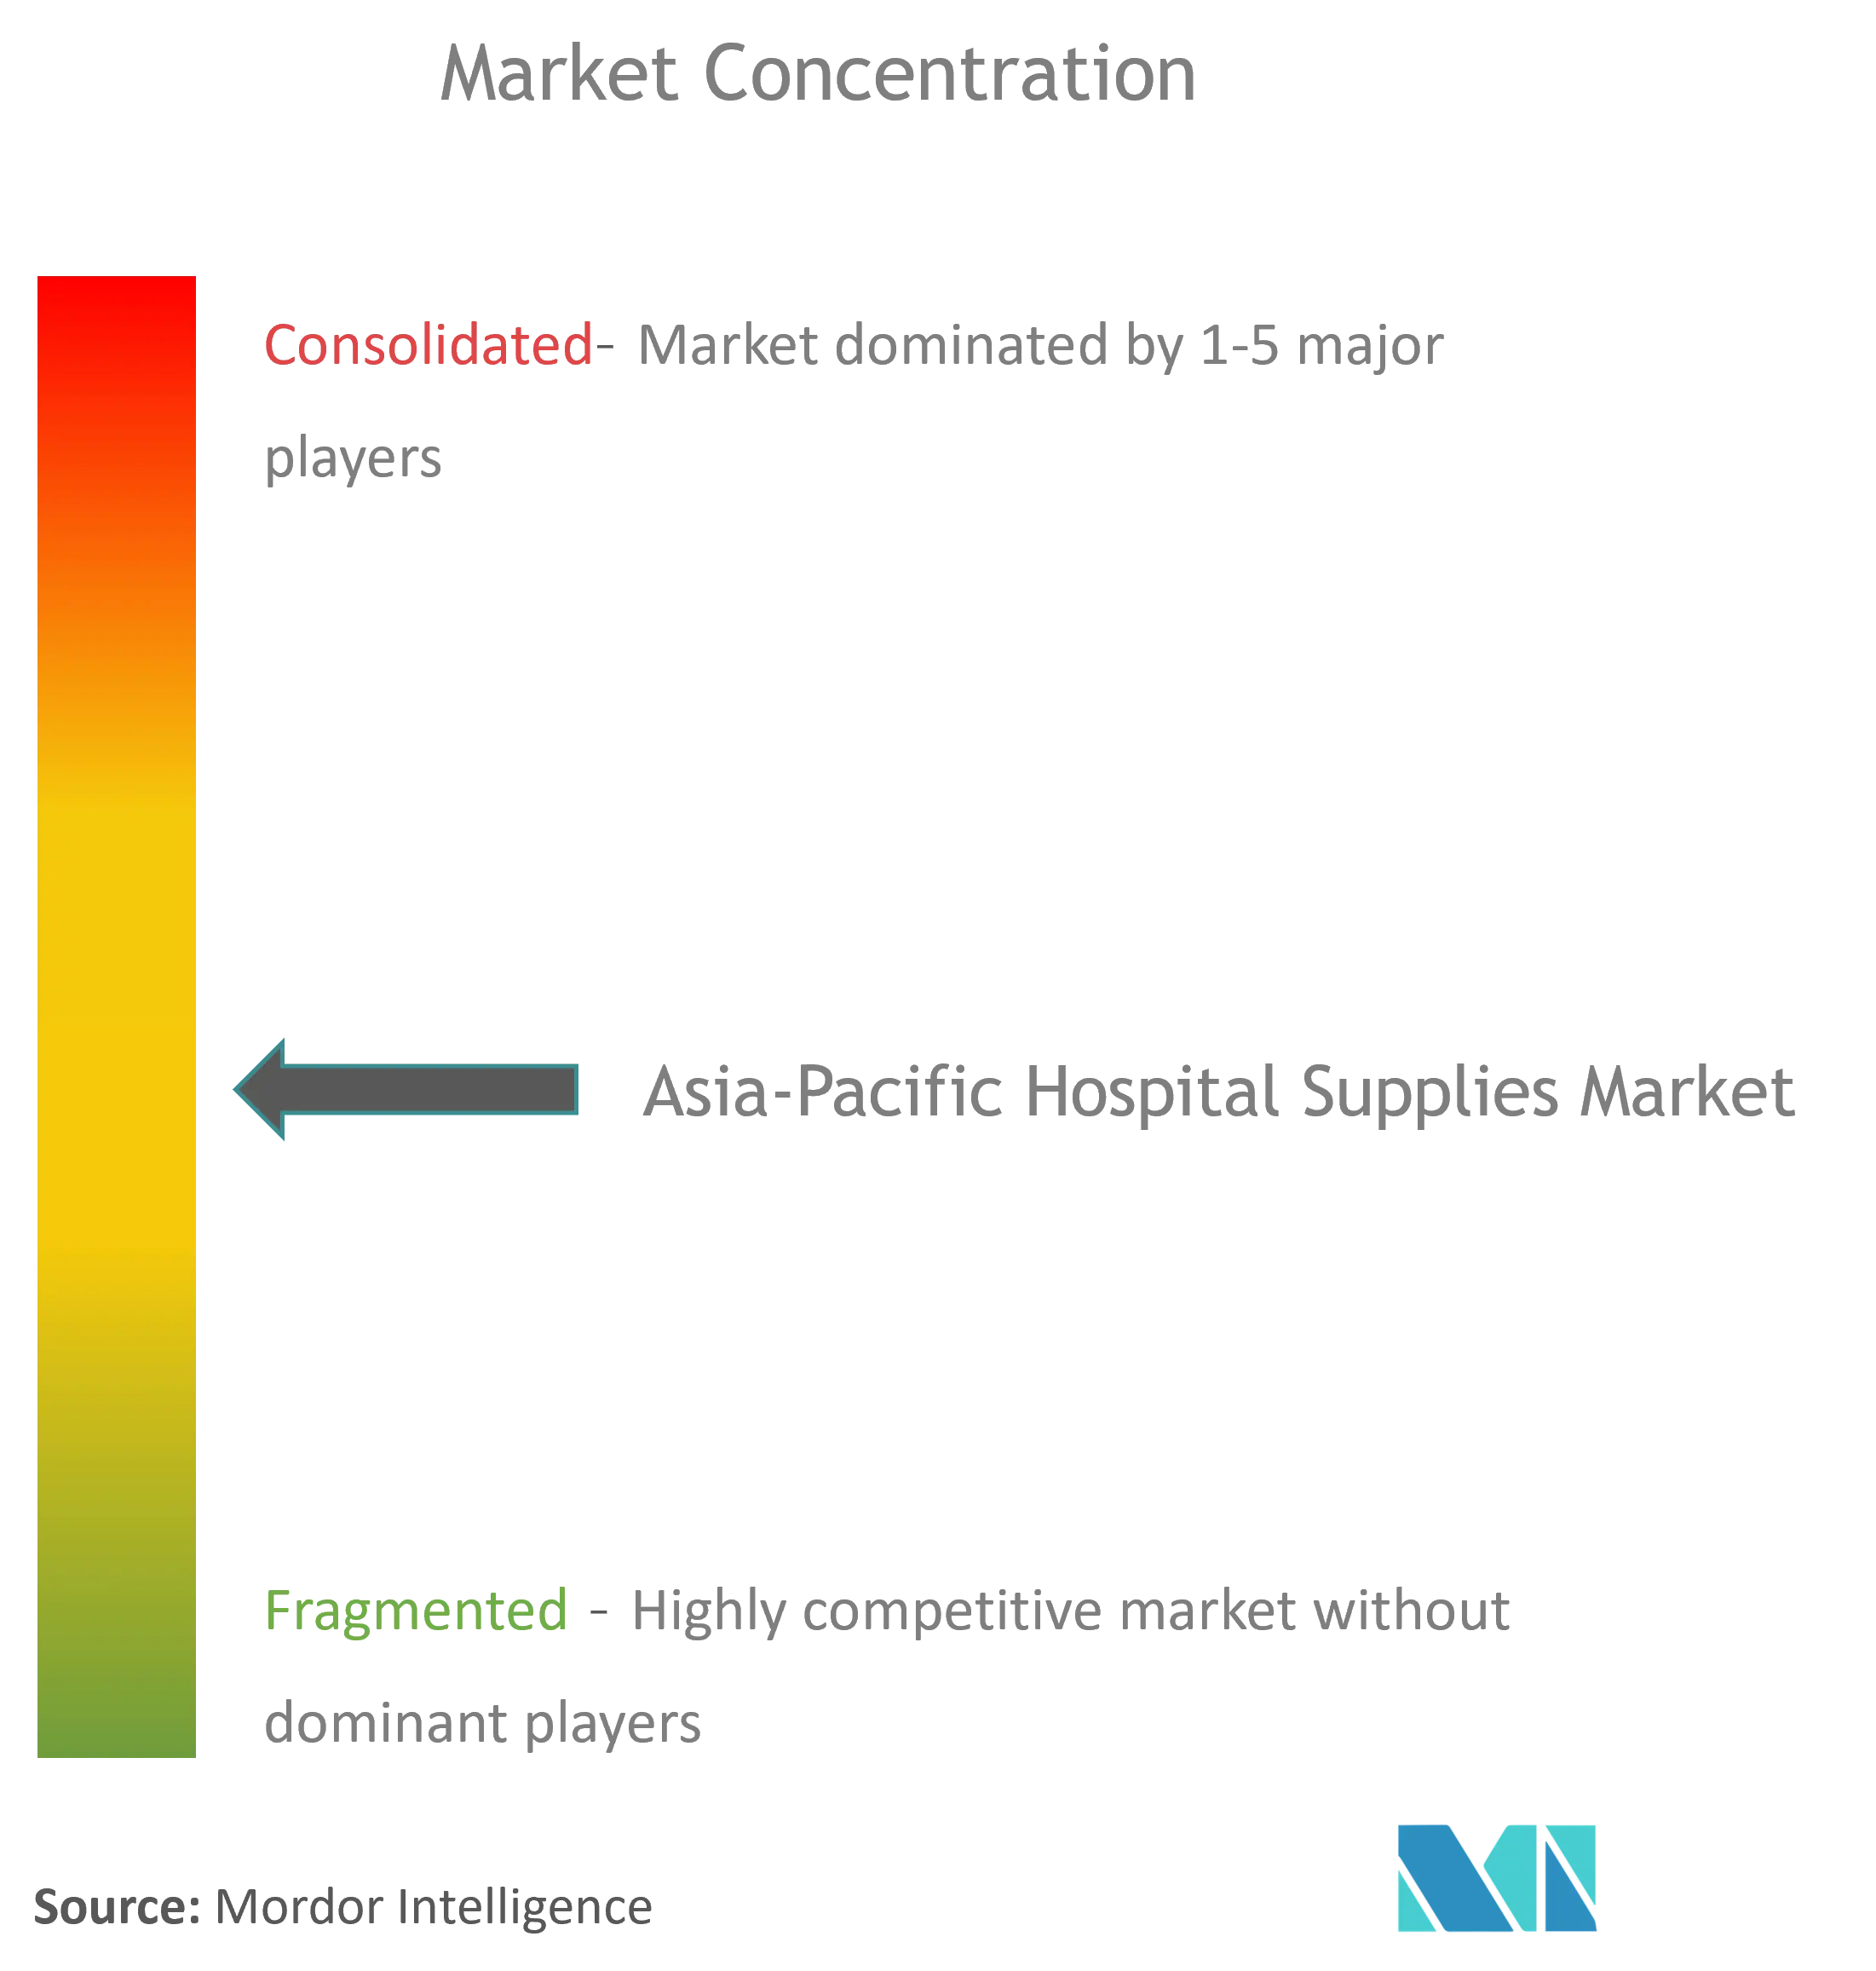 Asia-Pacific Hospital Supplies Market Concentration